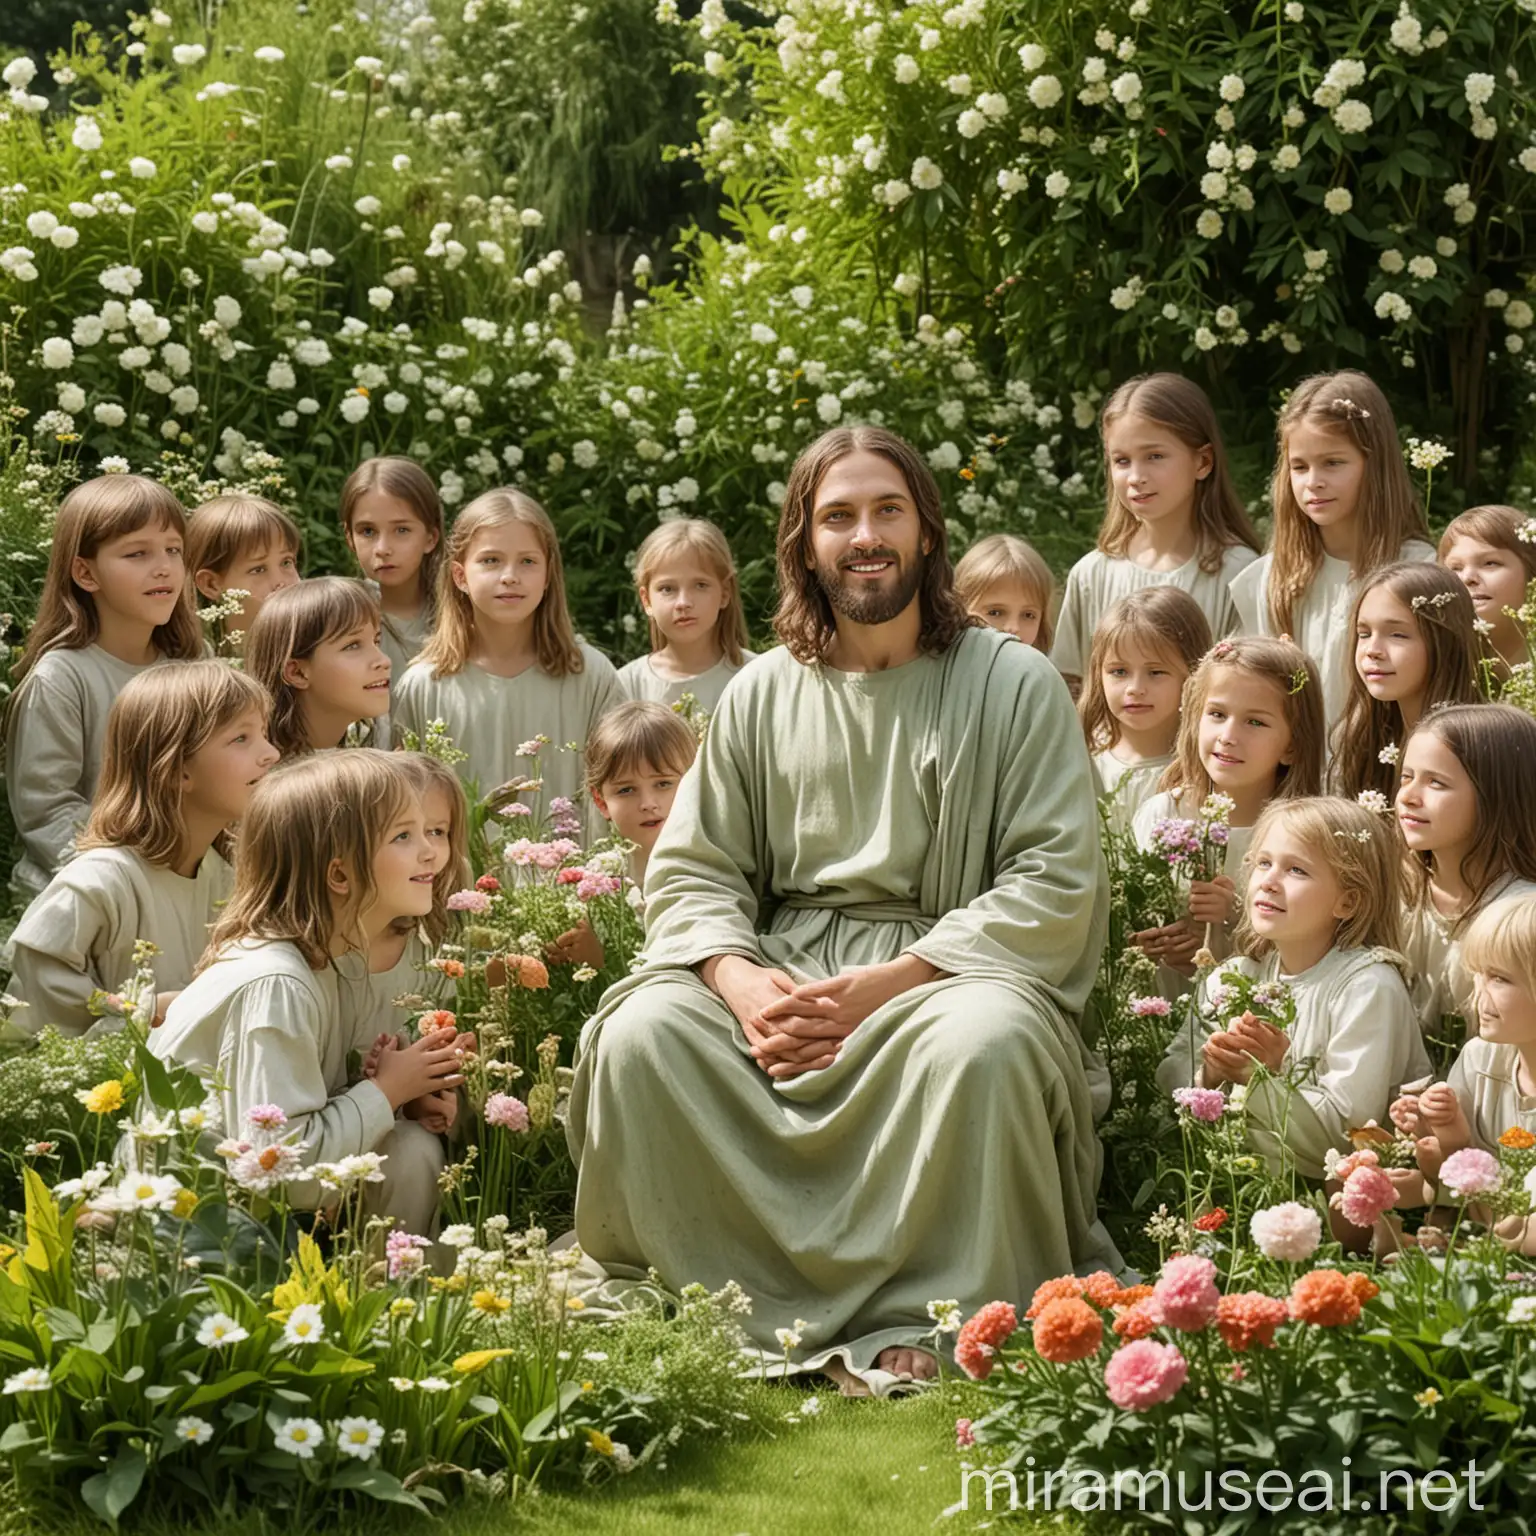 Christ Surrounded by Children in a Vibrant Garden